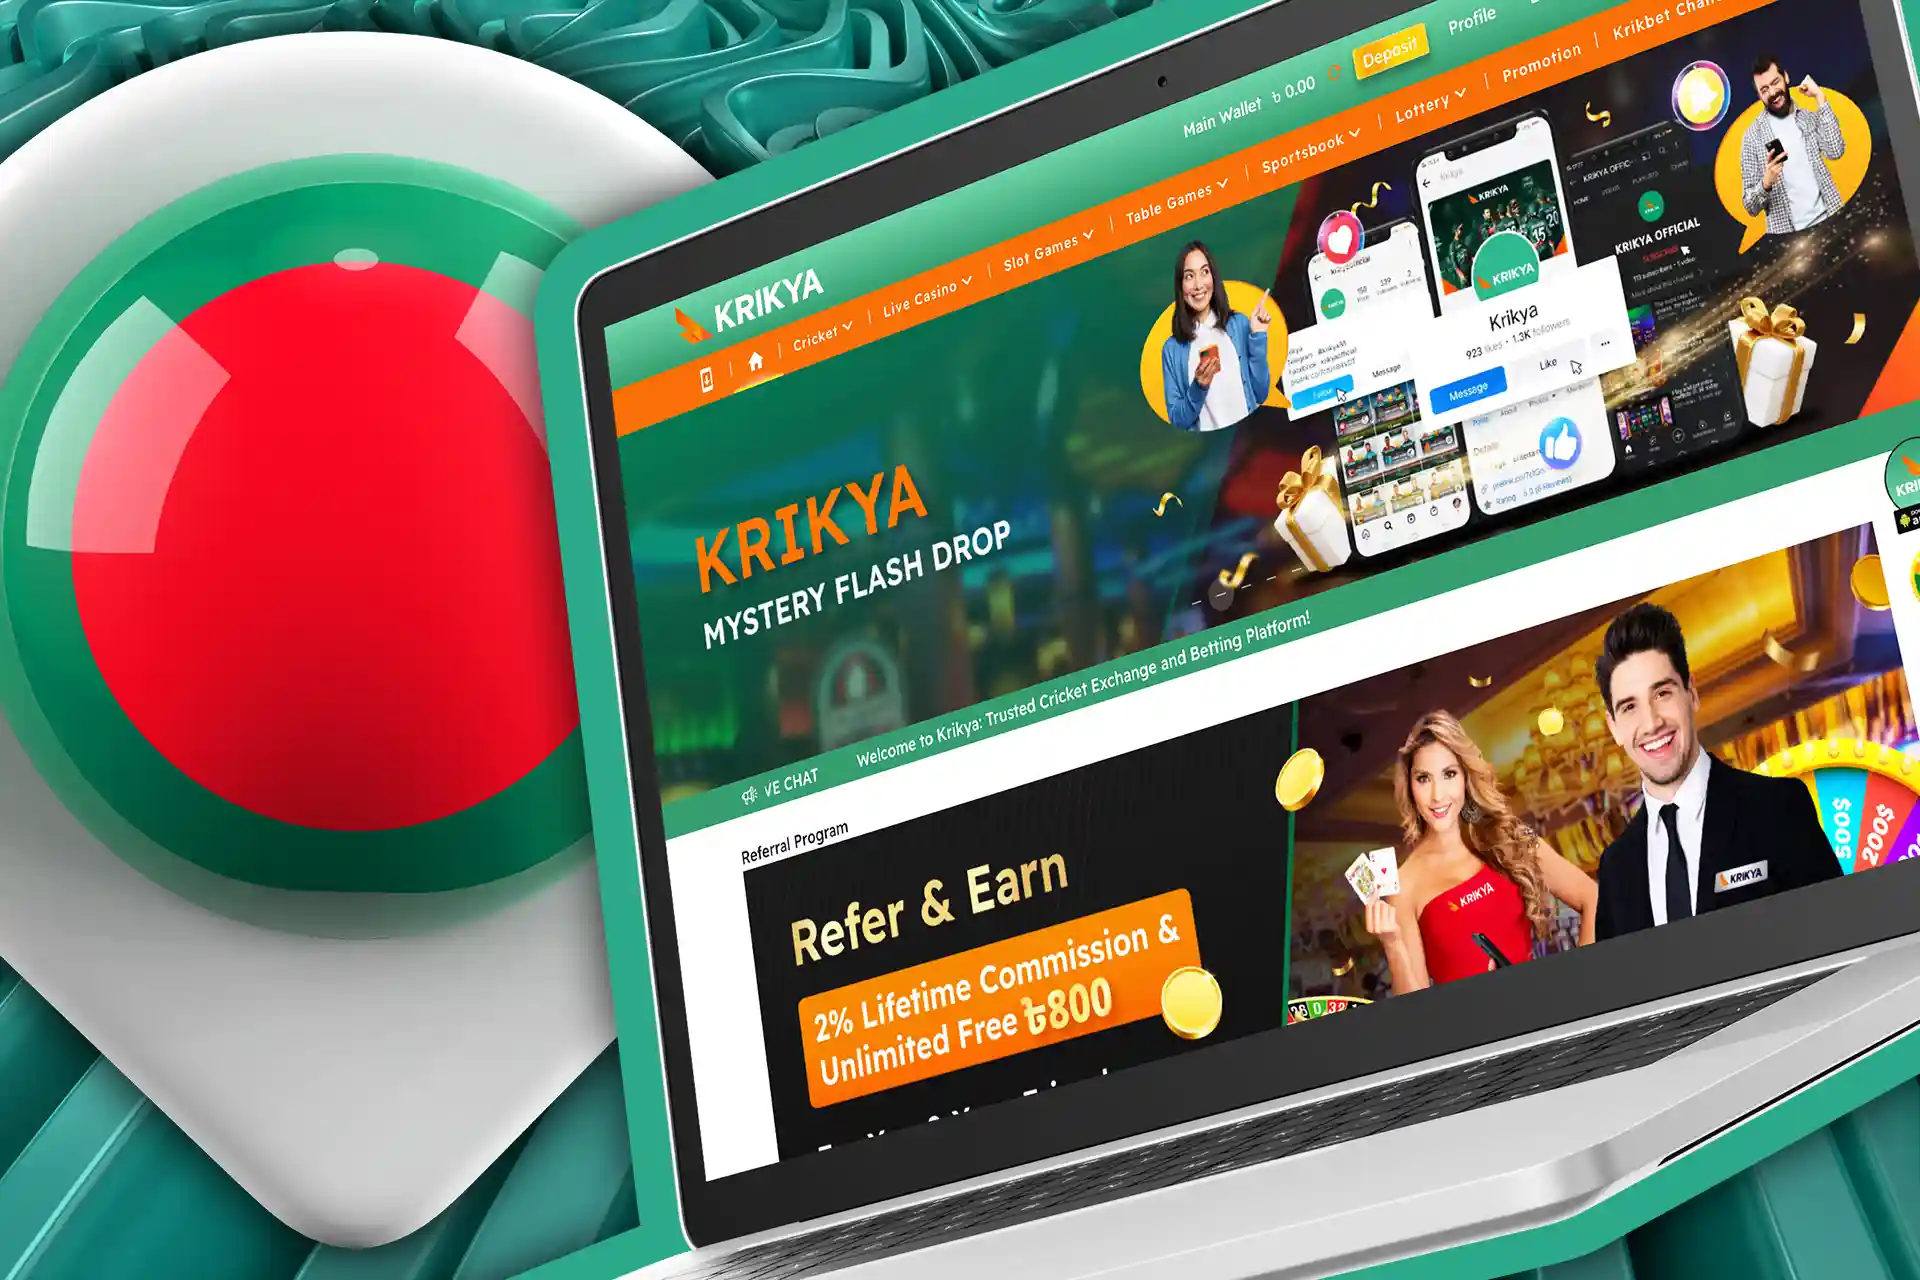 Go to the Krikya official website and dive into the betting and casino world.